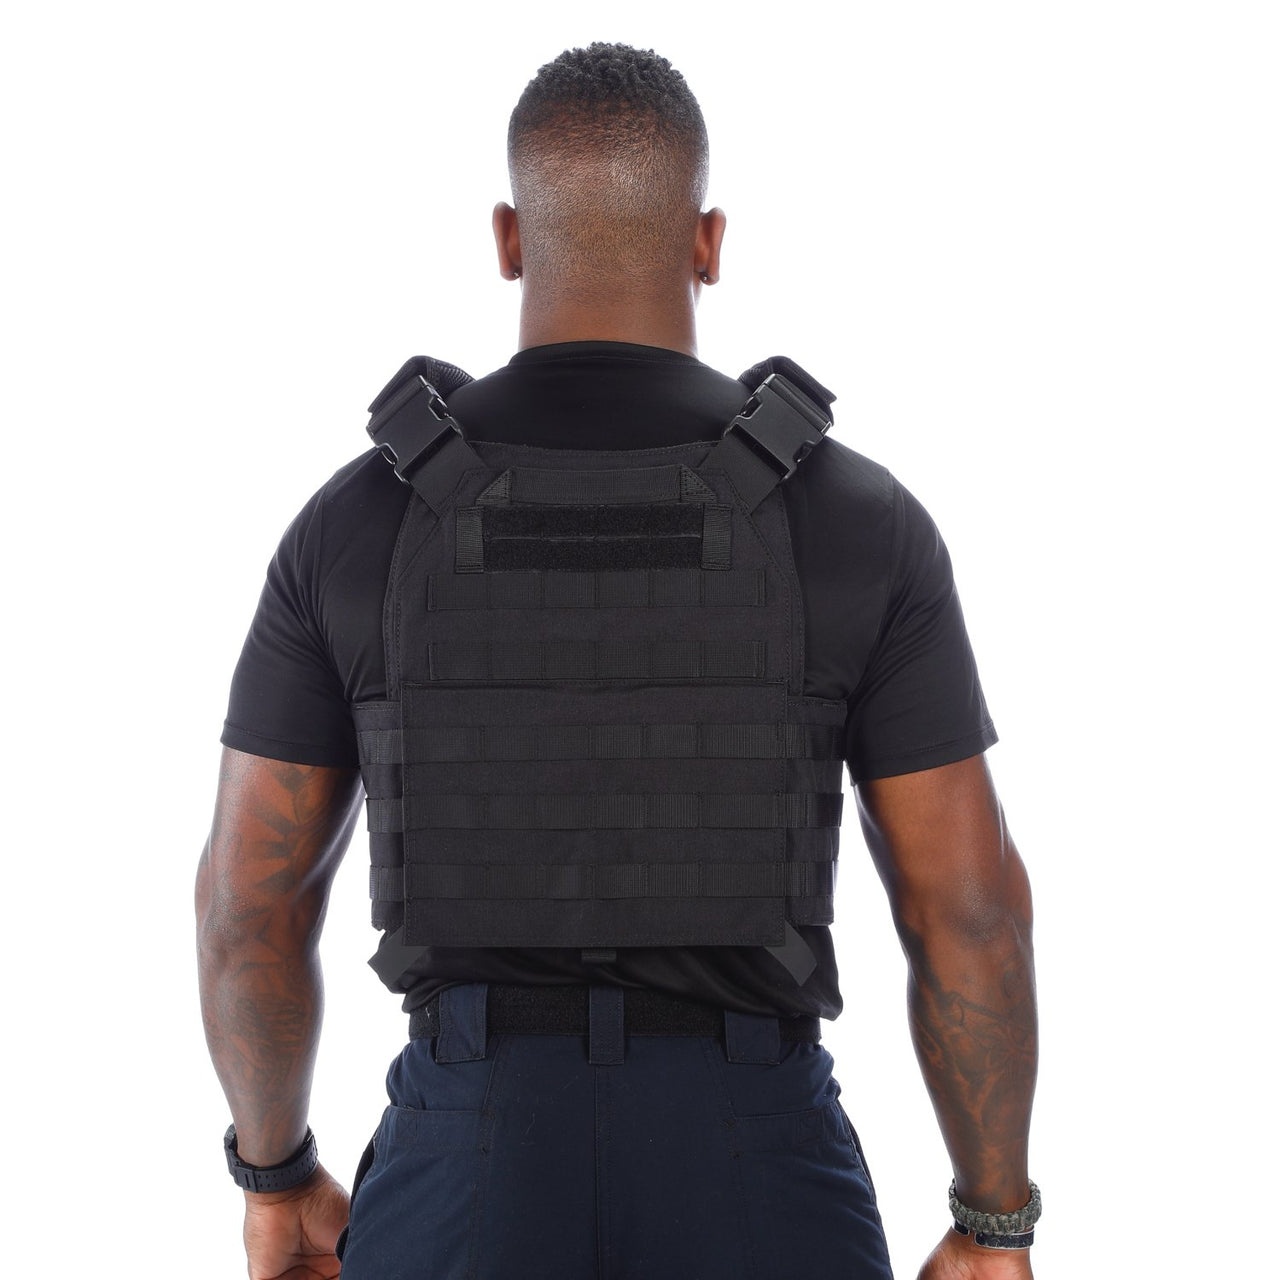 The back view of a man wearing a Body Armor Direct Advanced Body Armor Plate Carrier with Cummerbund.